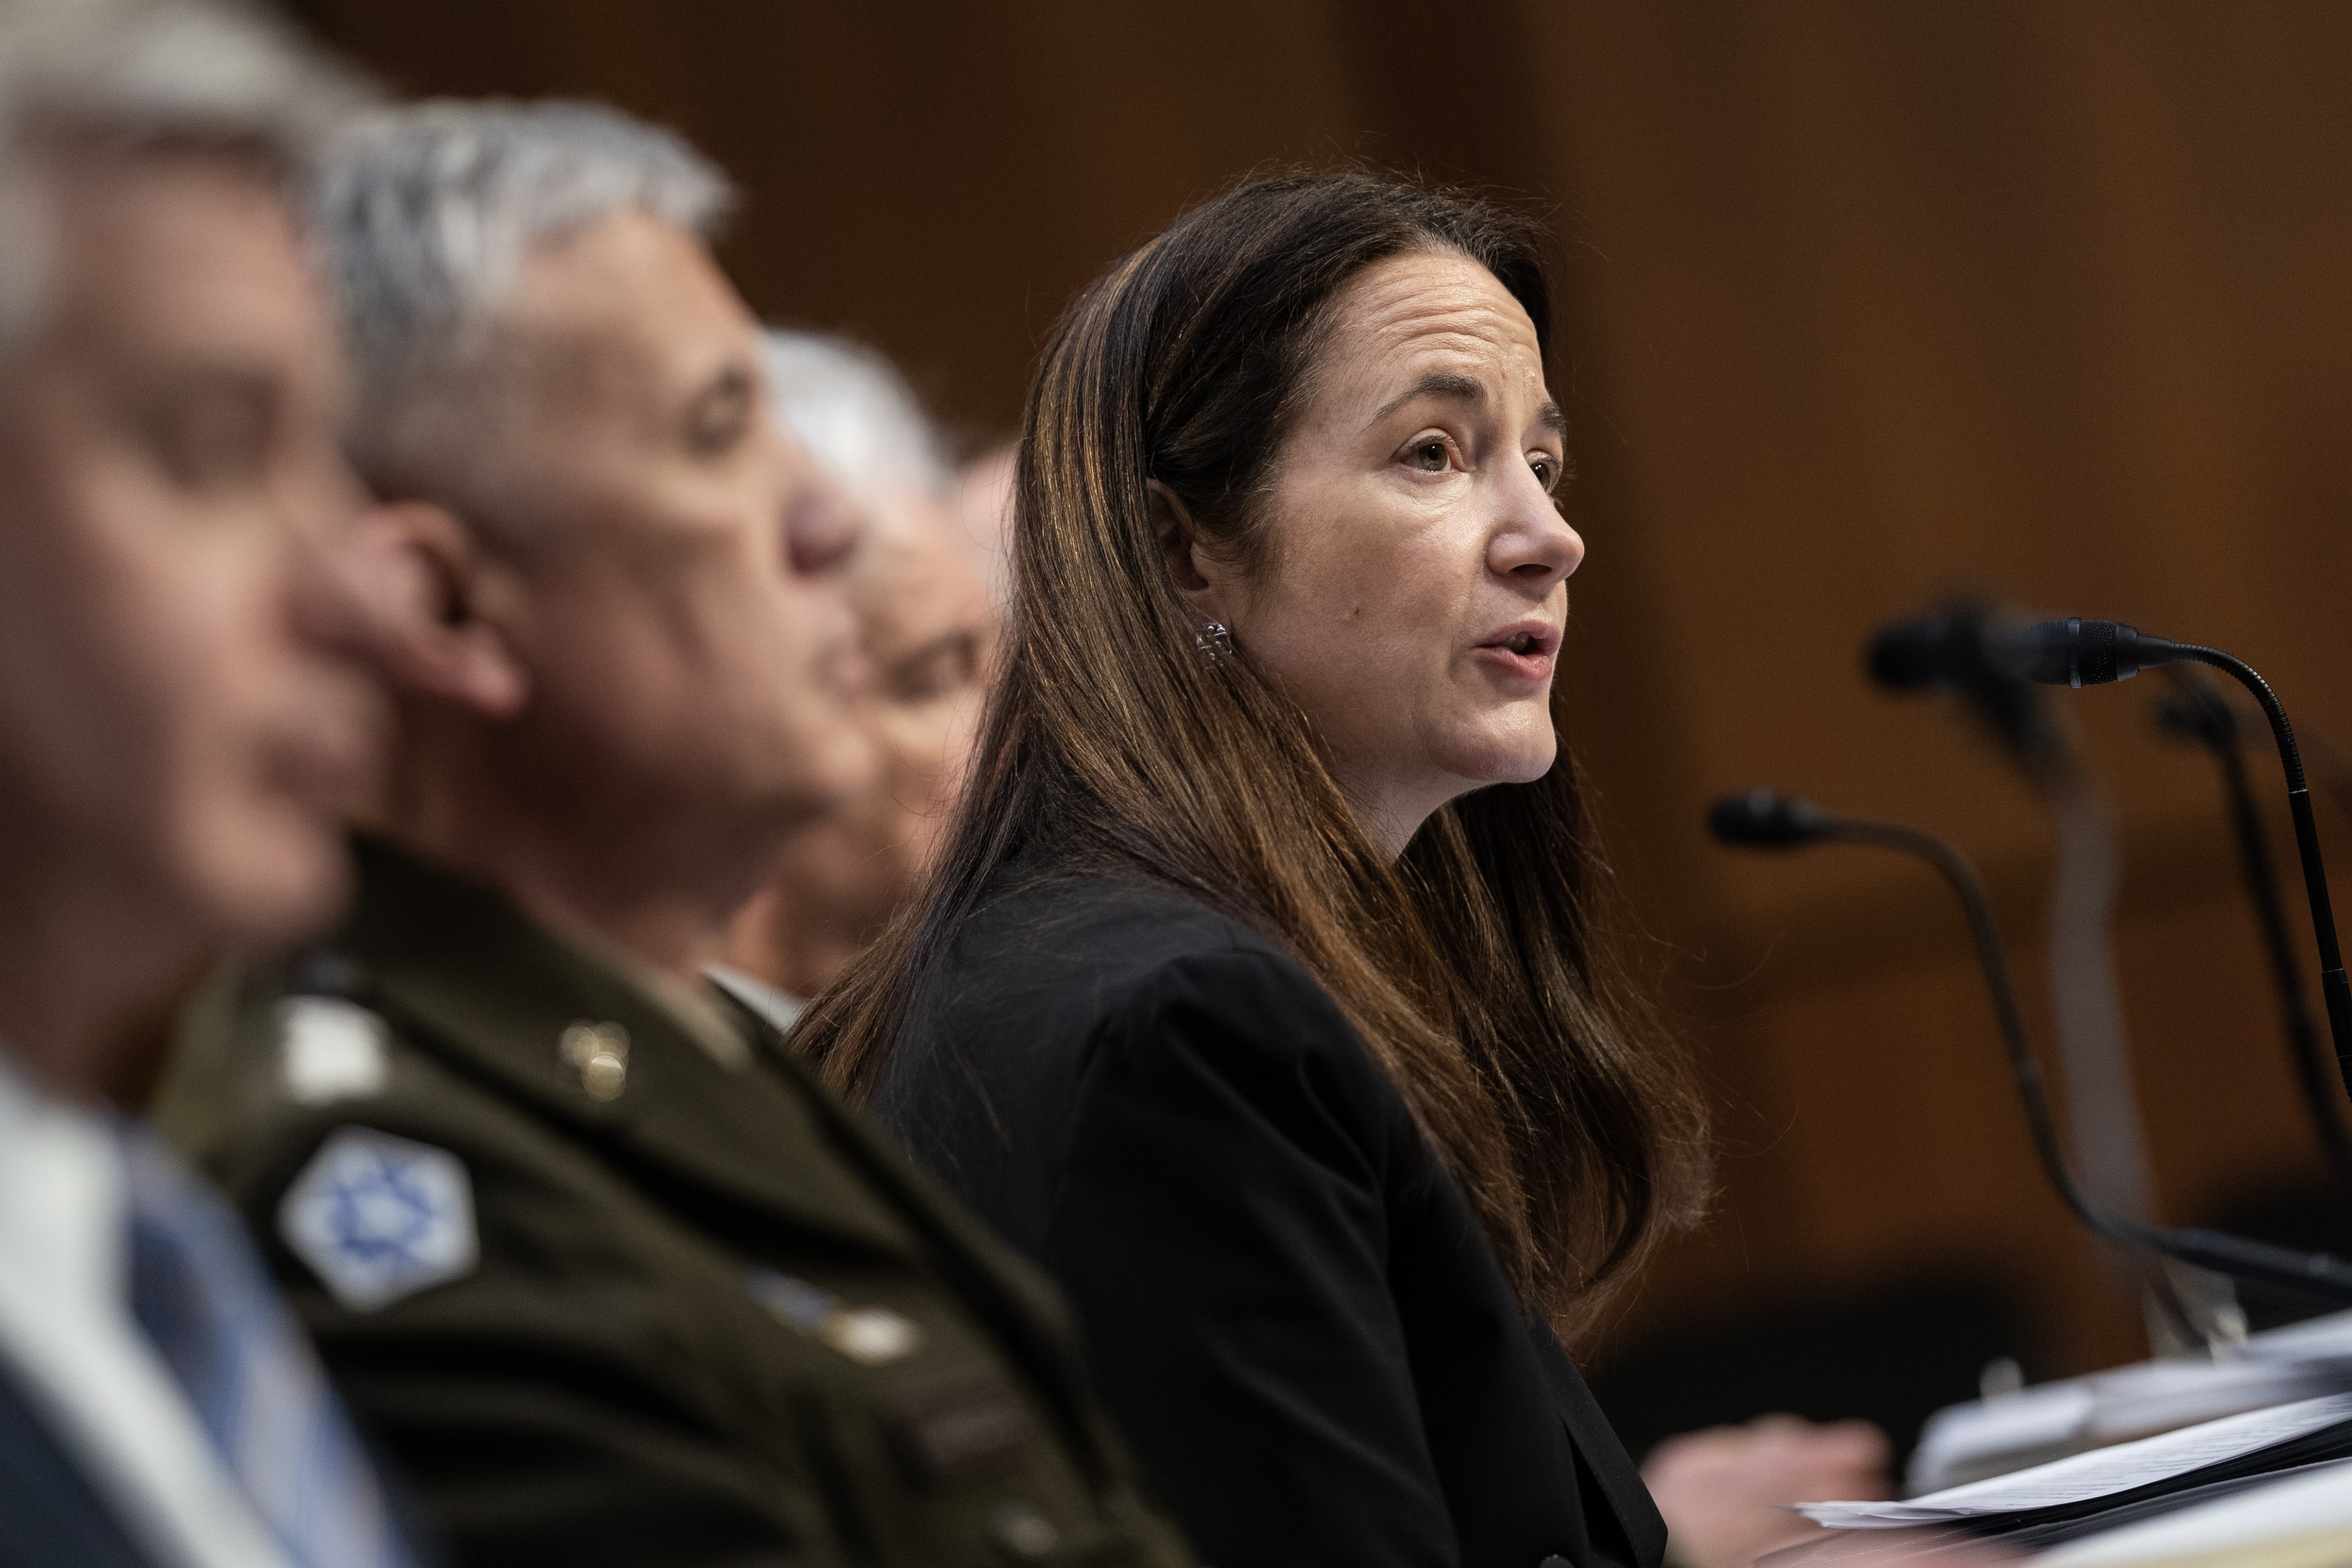 US Director of National Intelligence Avril Haines appears before a Senate Intelligence Committee hearing on worldwide threats on Wednesday. Photo: EPA-EFE